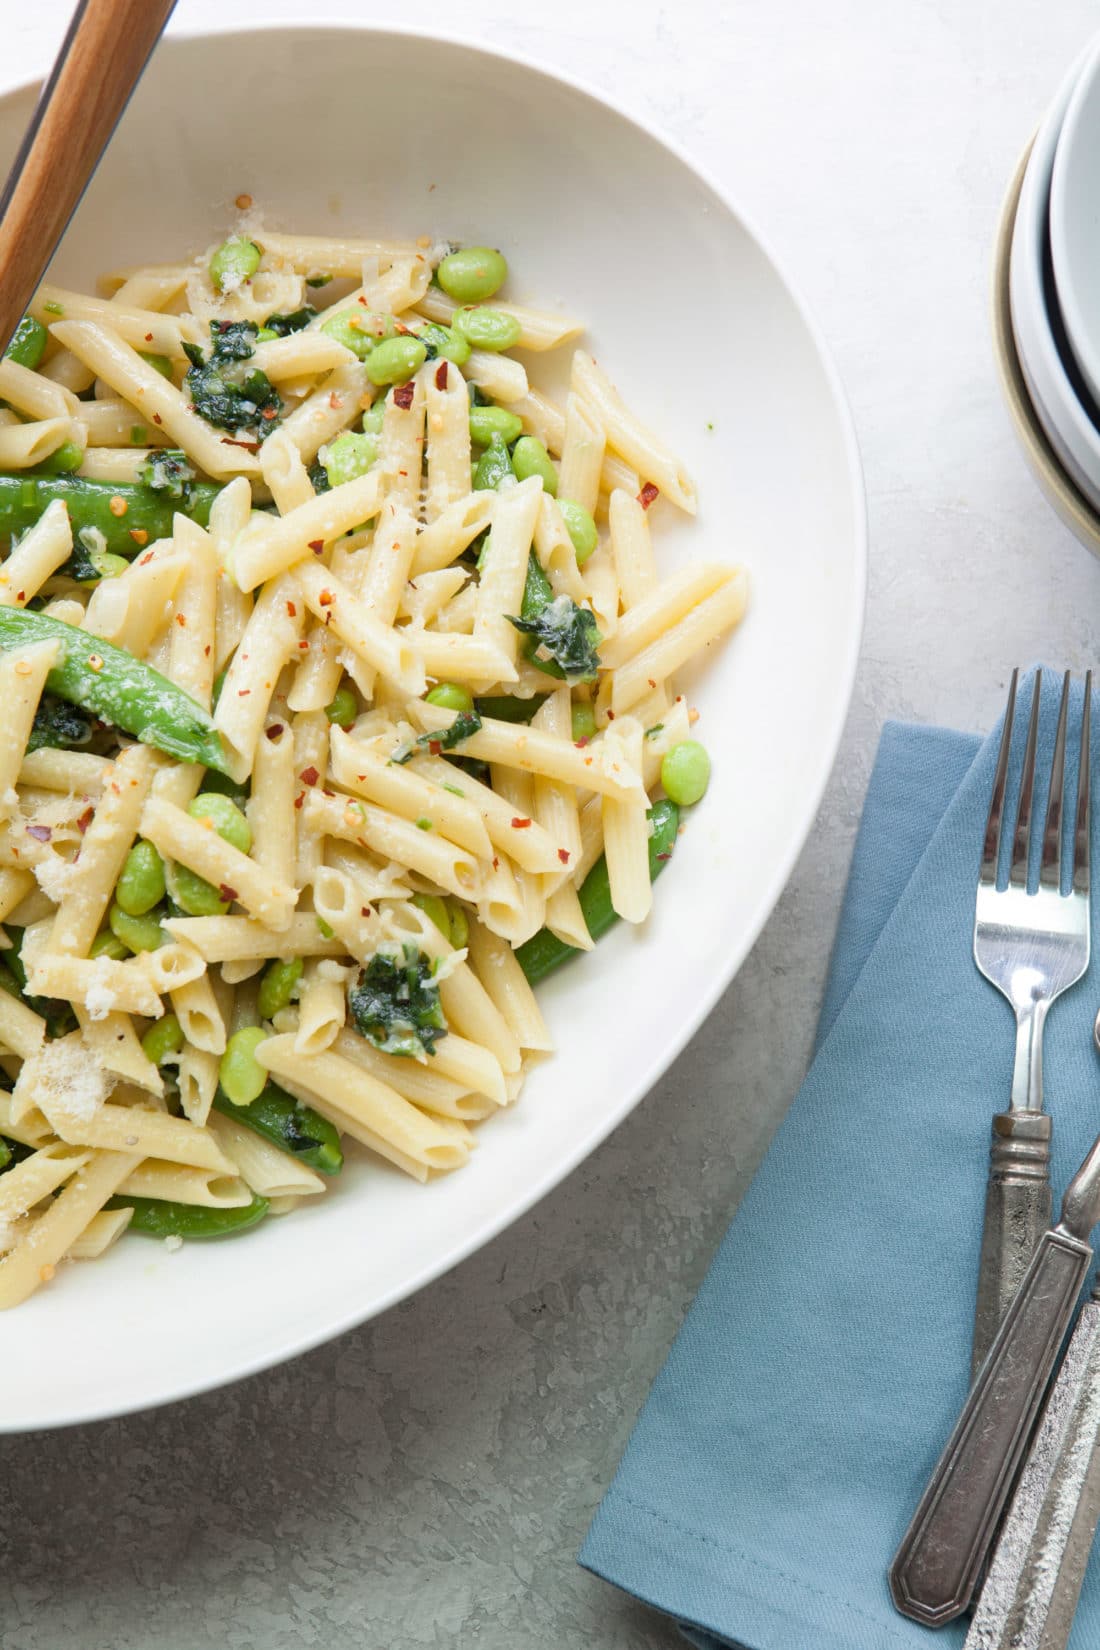 Bowl of Pasta with Ramps, Edamame, and Sugar Snap Peas in a Light Parmesan Cream Sauce.